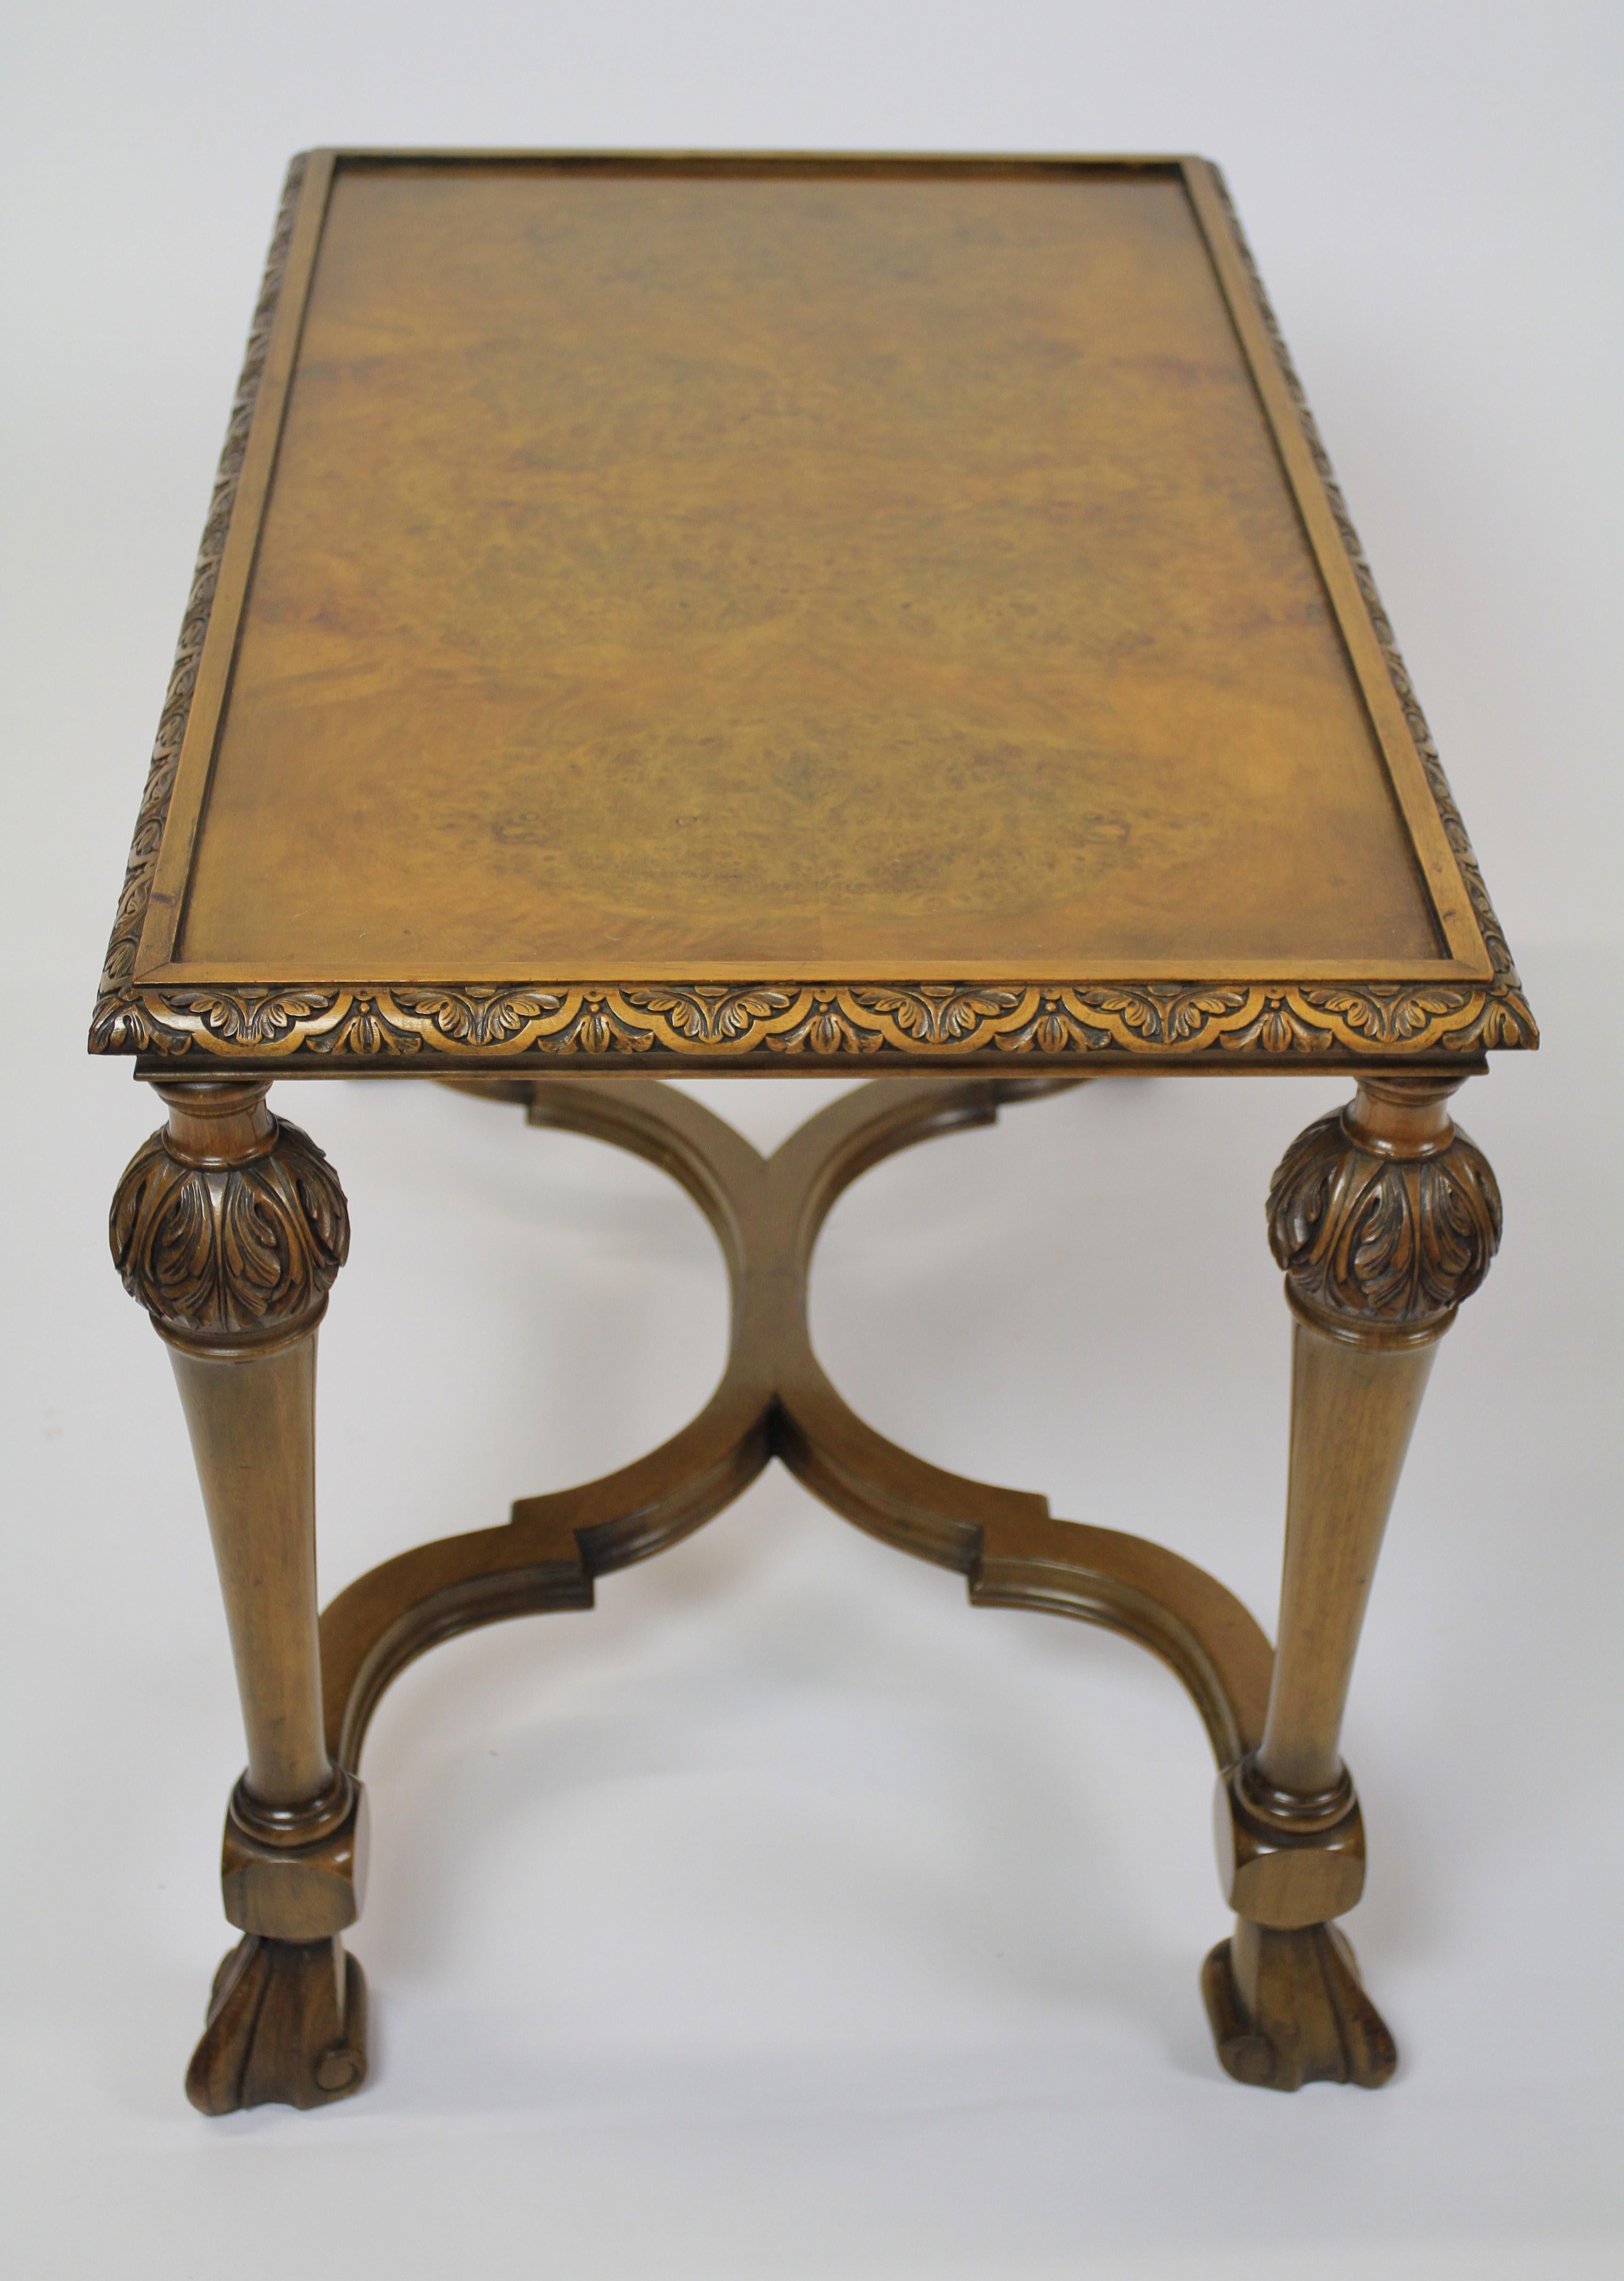 William and Mary William & Mary Style Burr Walnut & Carved Coffee Table circa 1930s For Sale